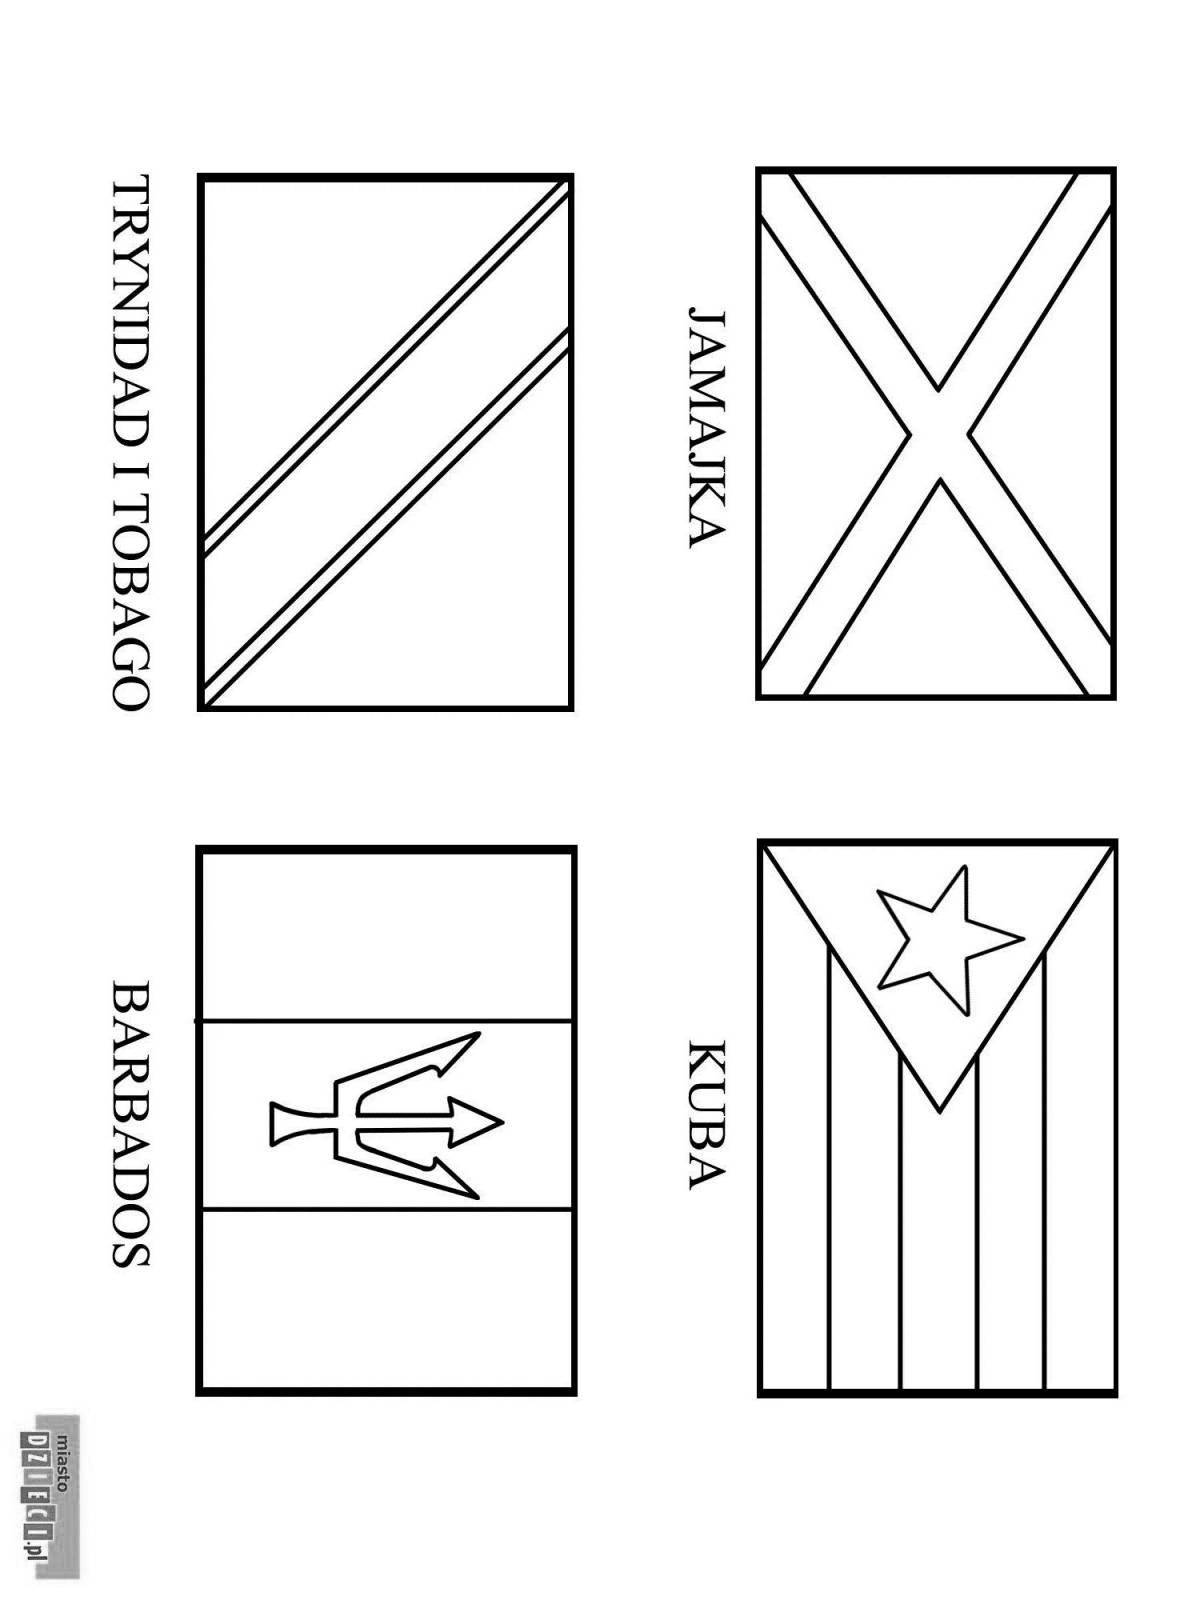 Dazzling European flags coloring page